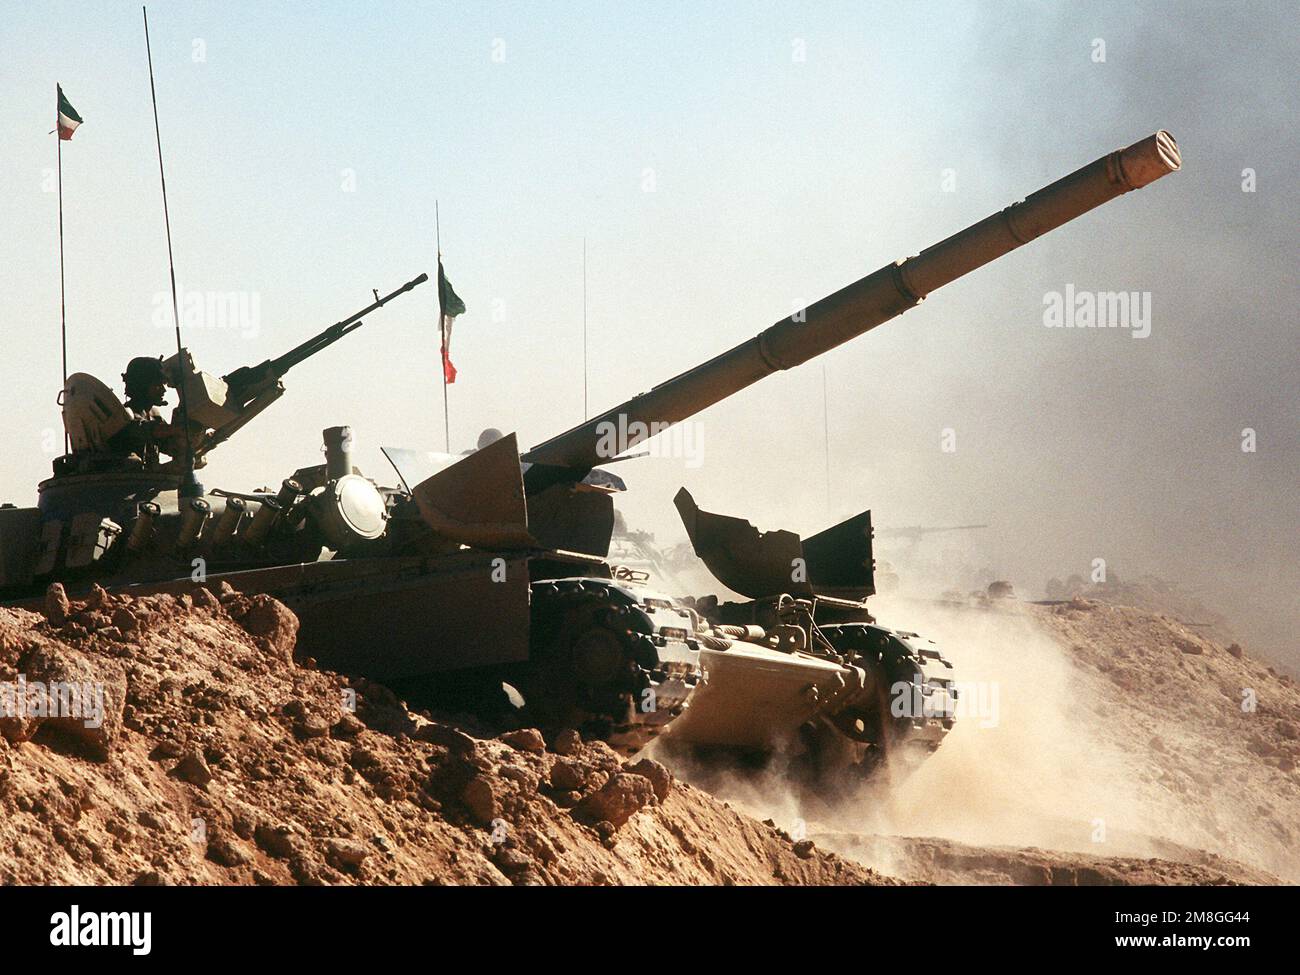 A Kuwaiti M-84 main battle tank crosses a trench during a capabilities demonstration at a Kuwaiti outpost during Operation Desert Shield.. Subject Operation/Series: DESERT SHIELD Country: Saudi Arabia(SAU) Stock Photo